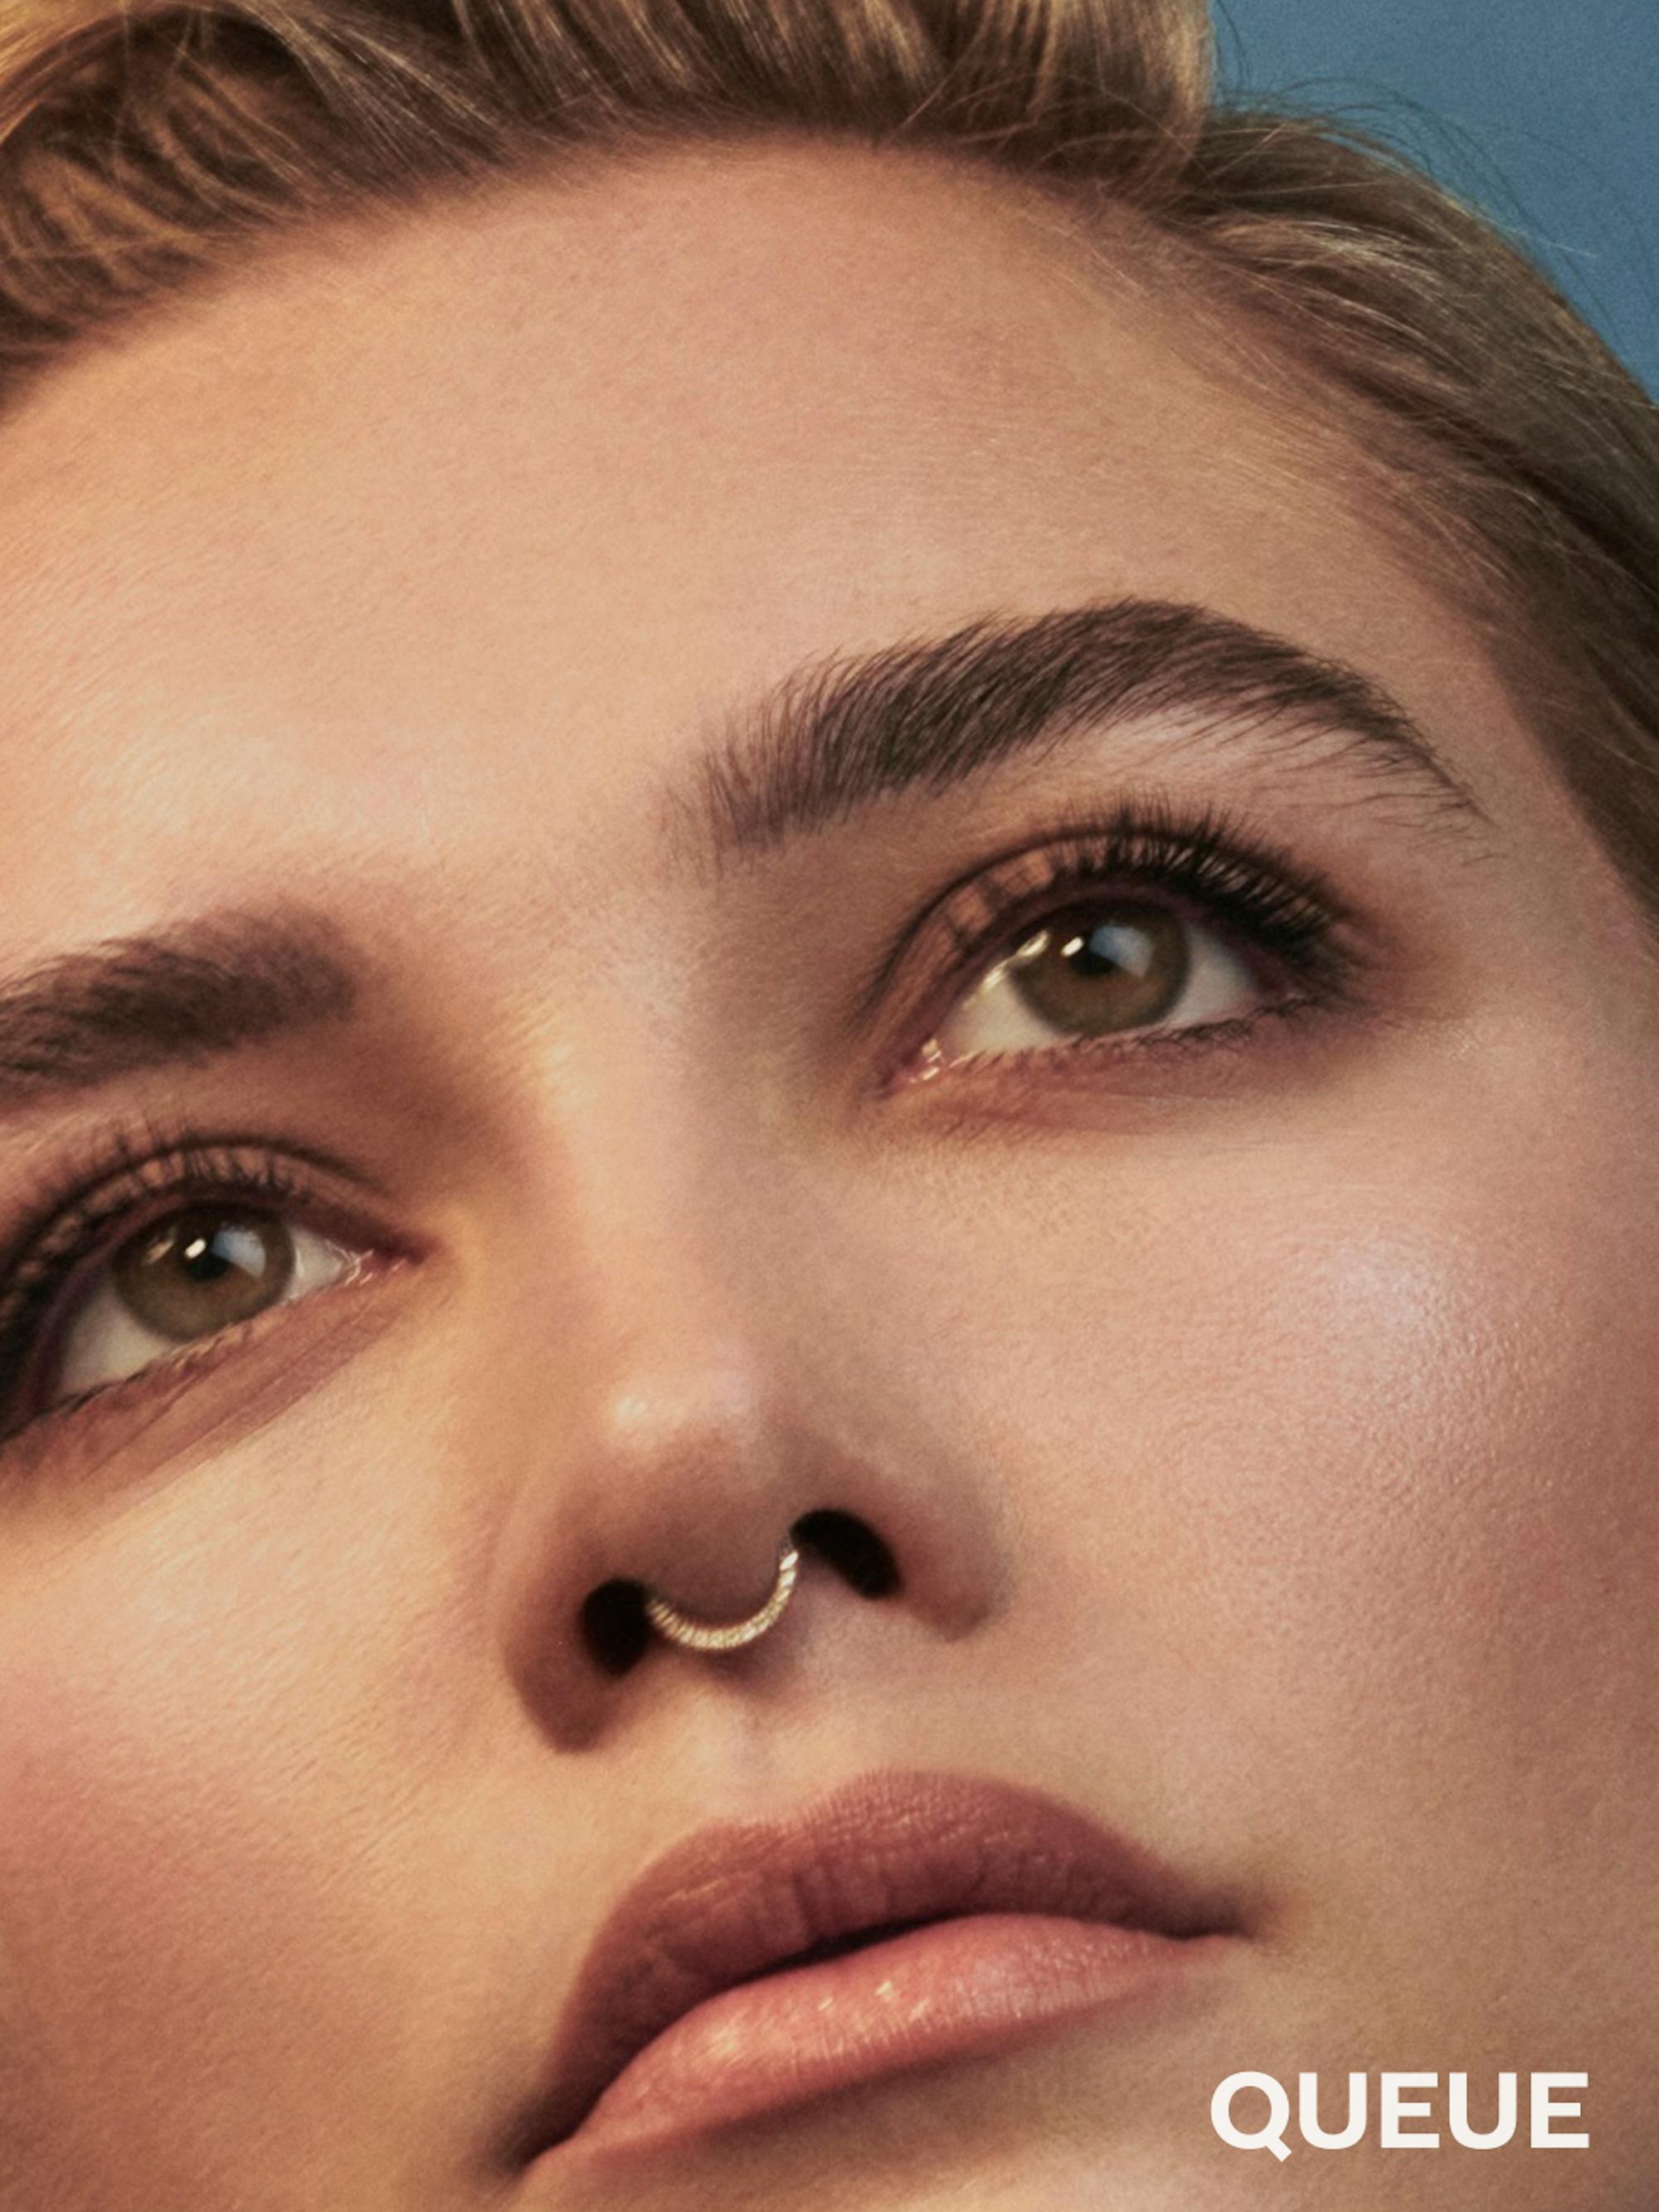 Florence Pugh wears a nose ring and looks offscreen.